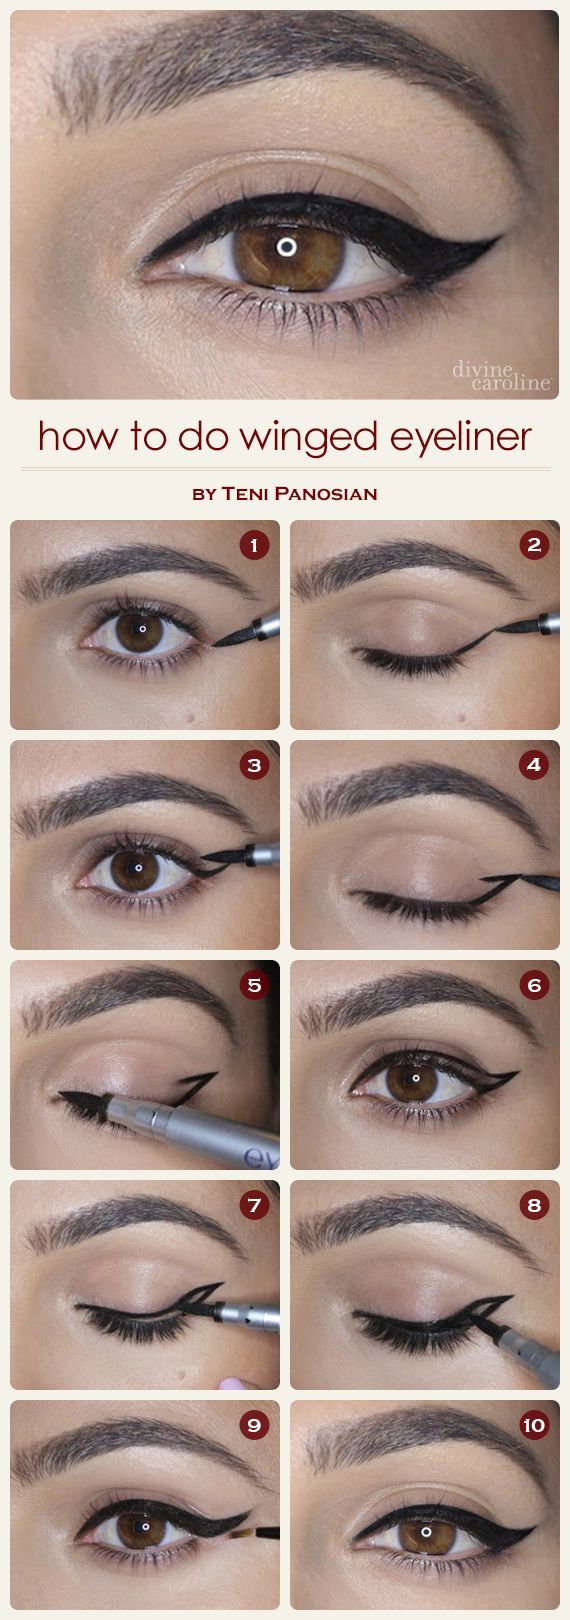 This tutorial will help you get a flawless cat-eye makeup look every time.